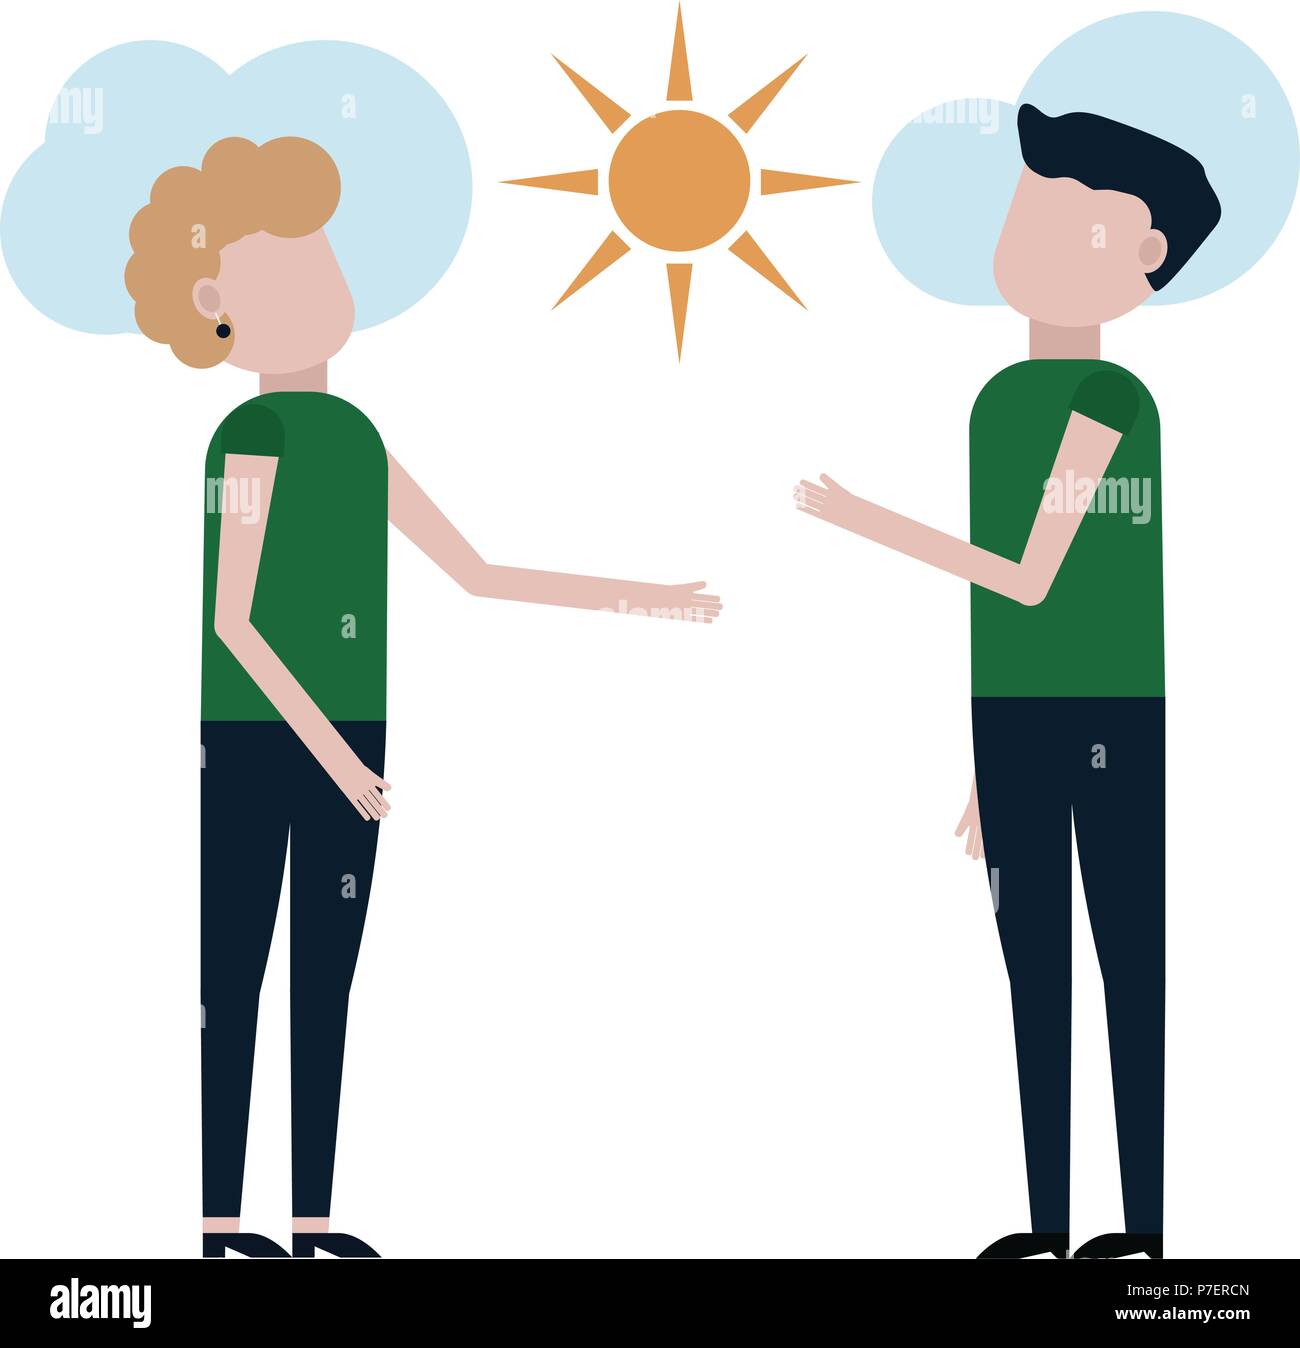 A guy and a girl are admiring the sunny day vector illustration on white background Stock Vector